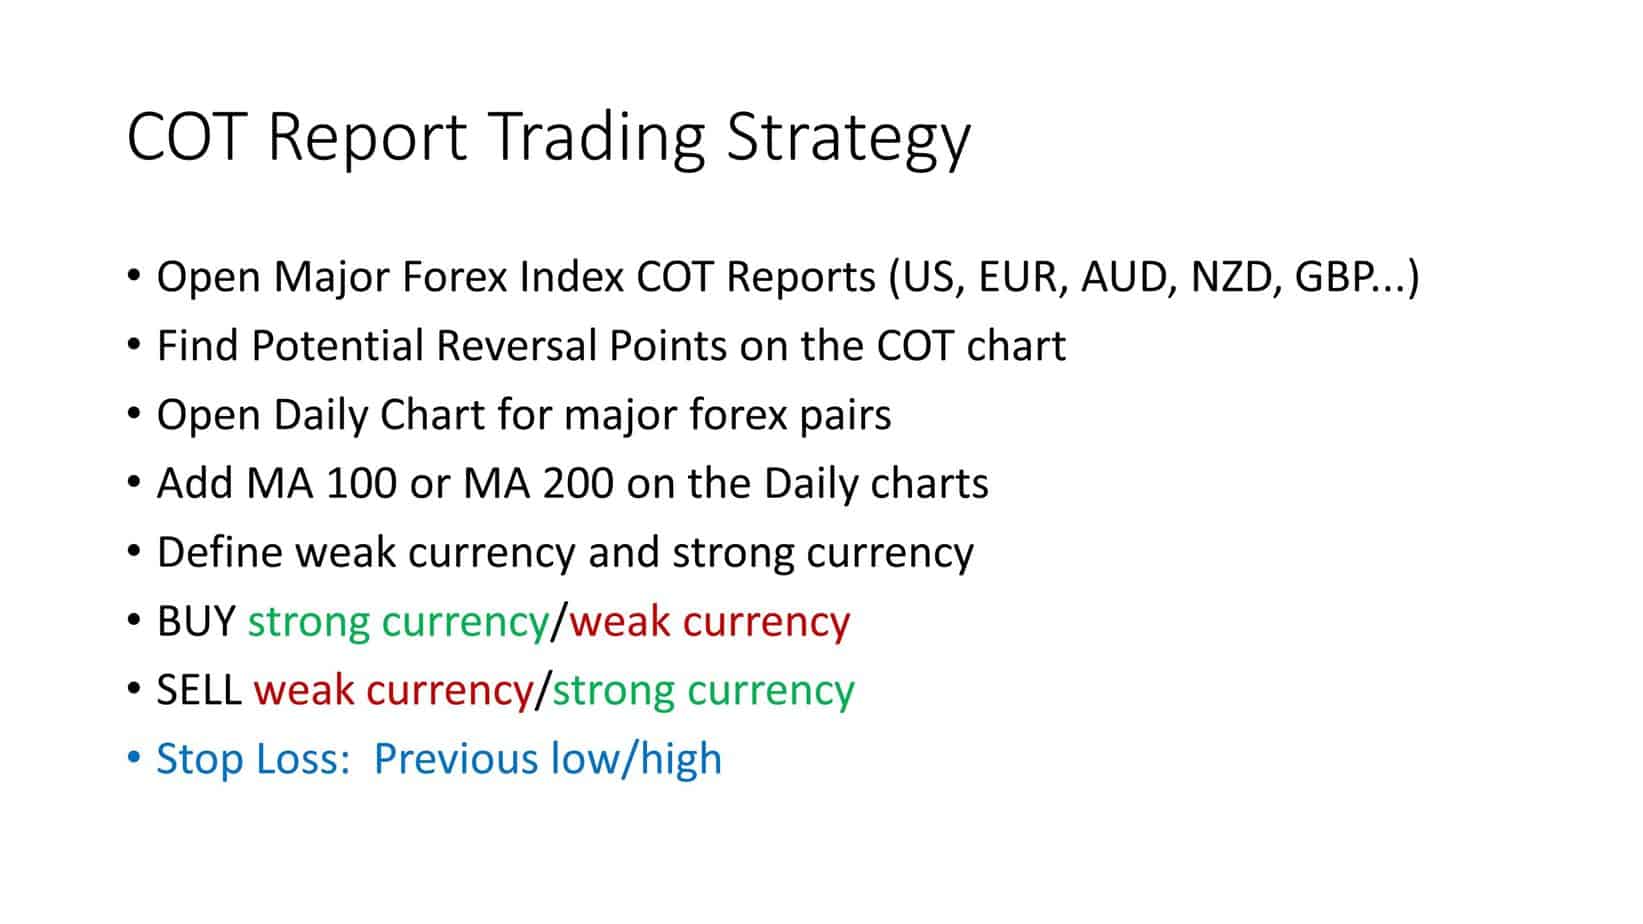 cot report strategy steps